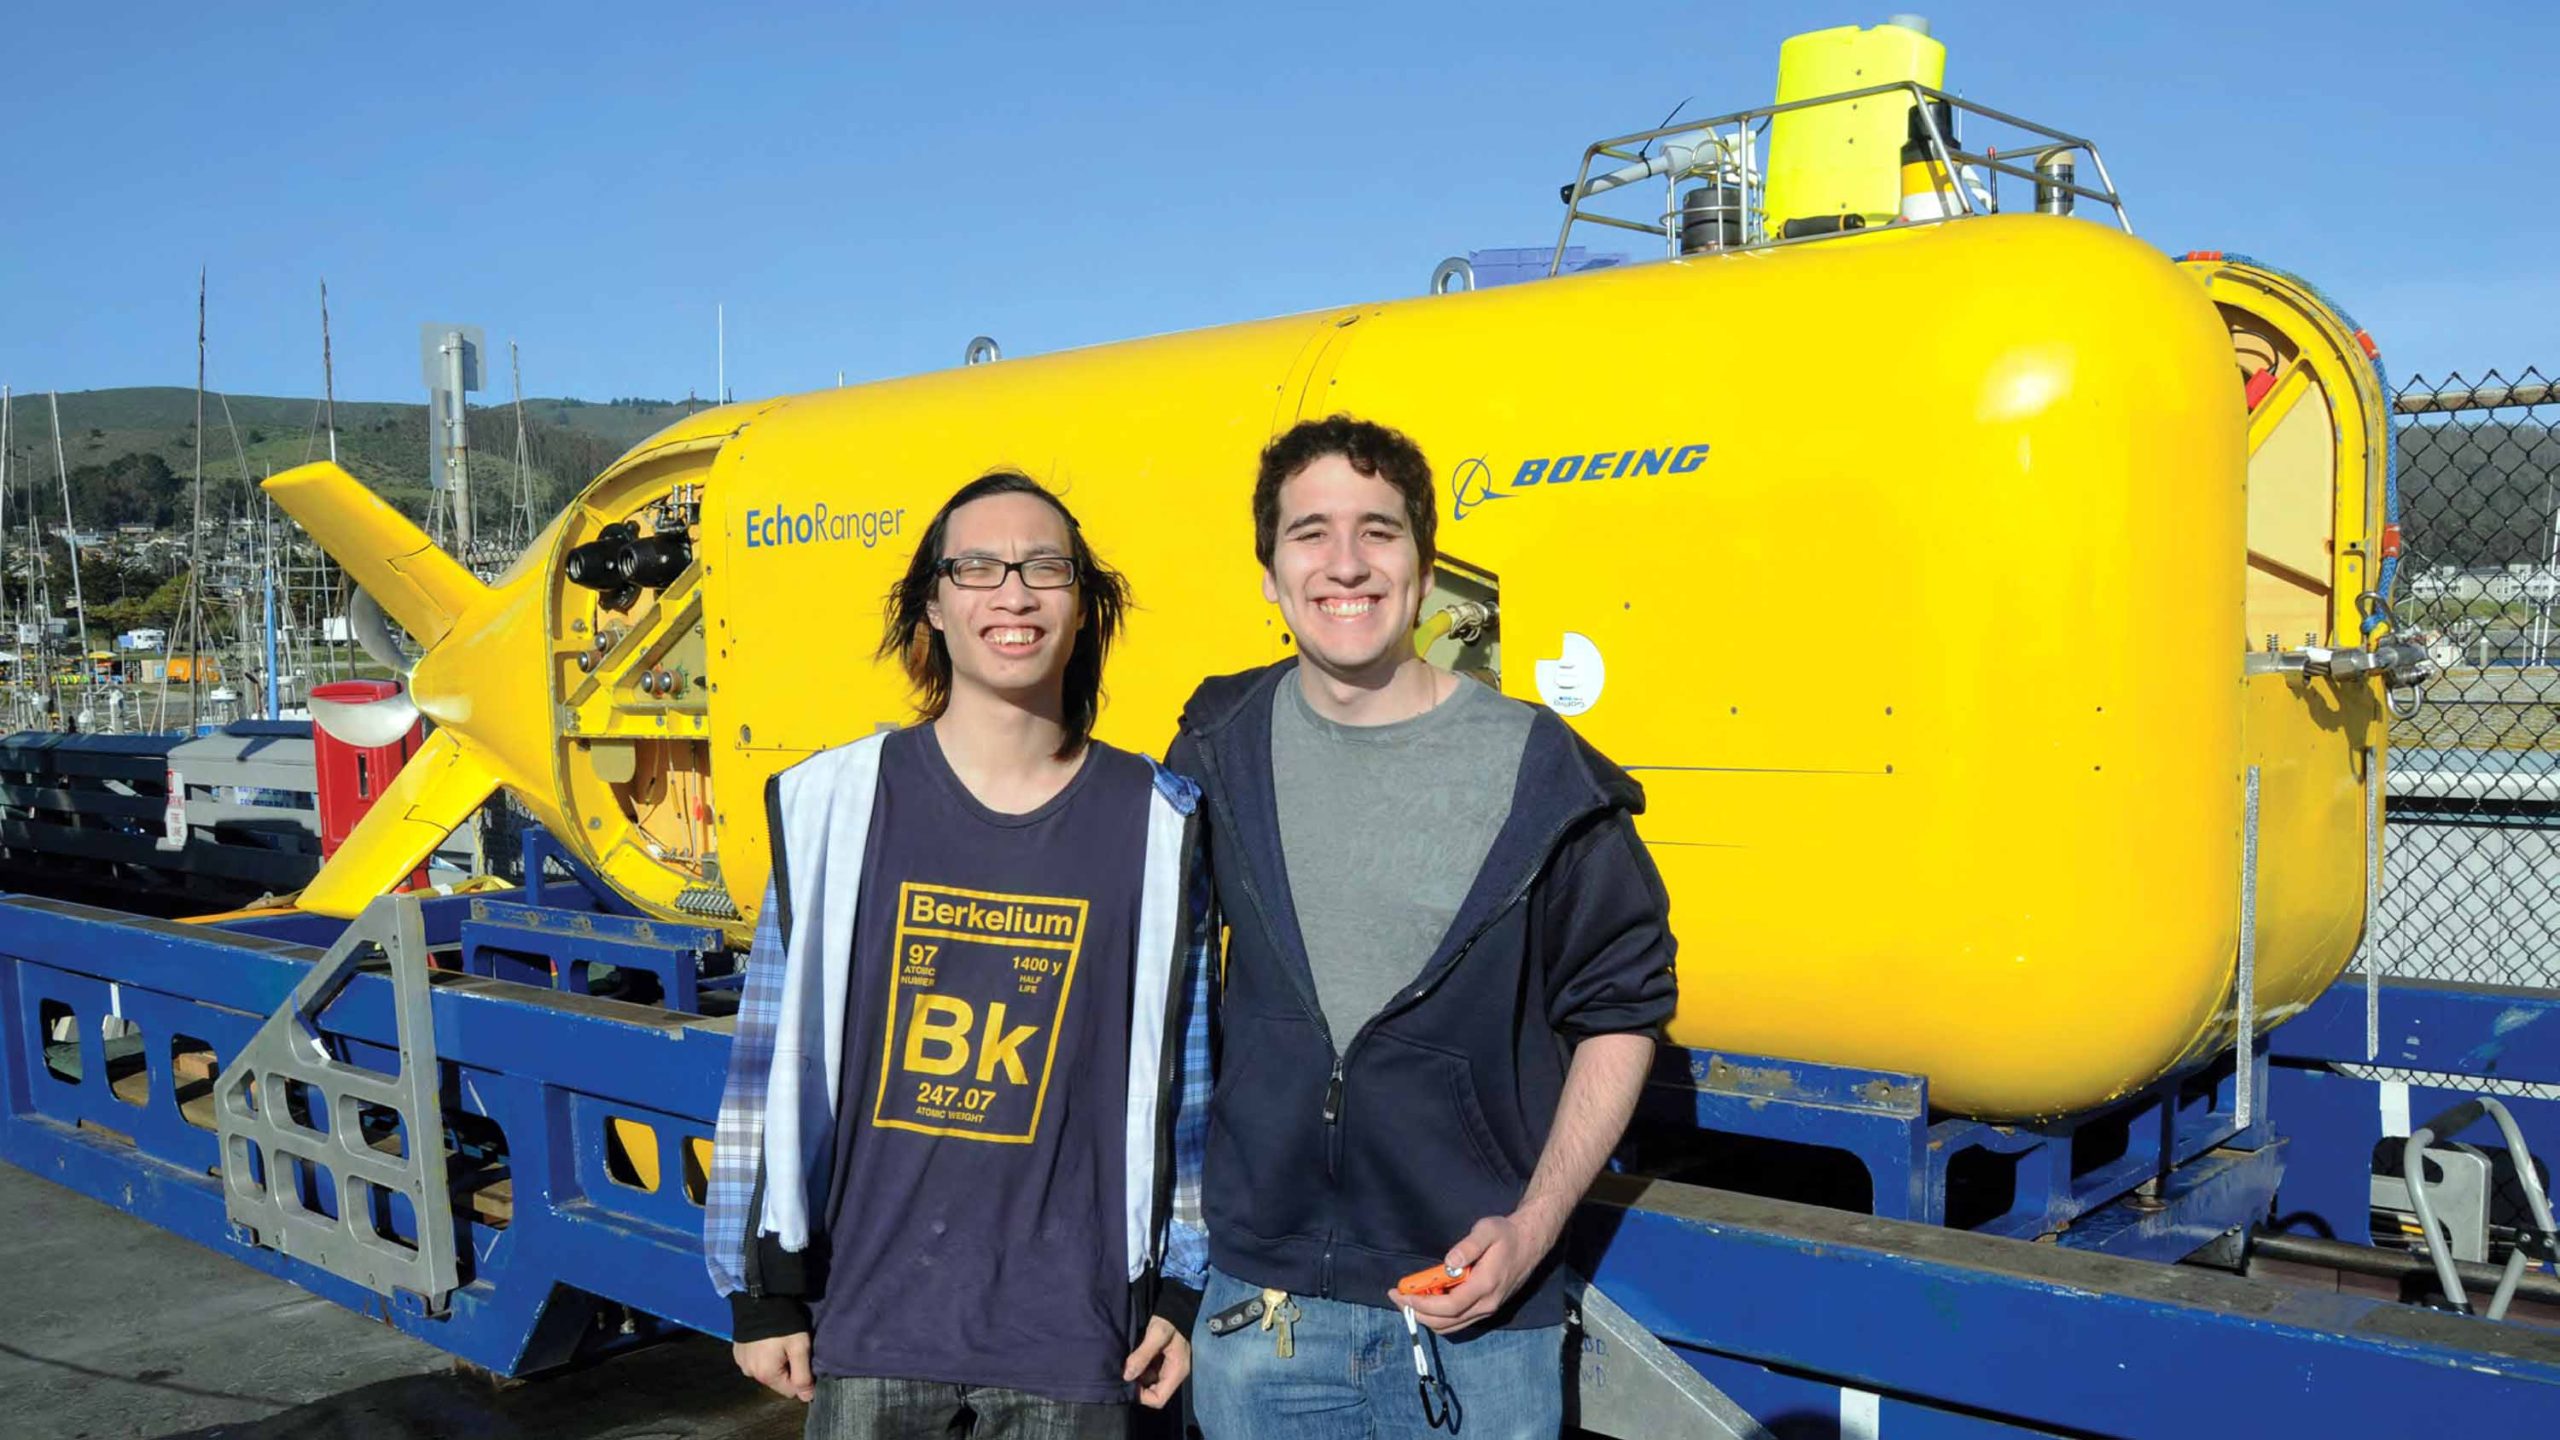 Students with submersible underwater vehicle